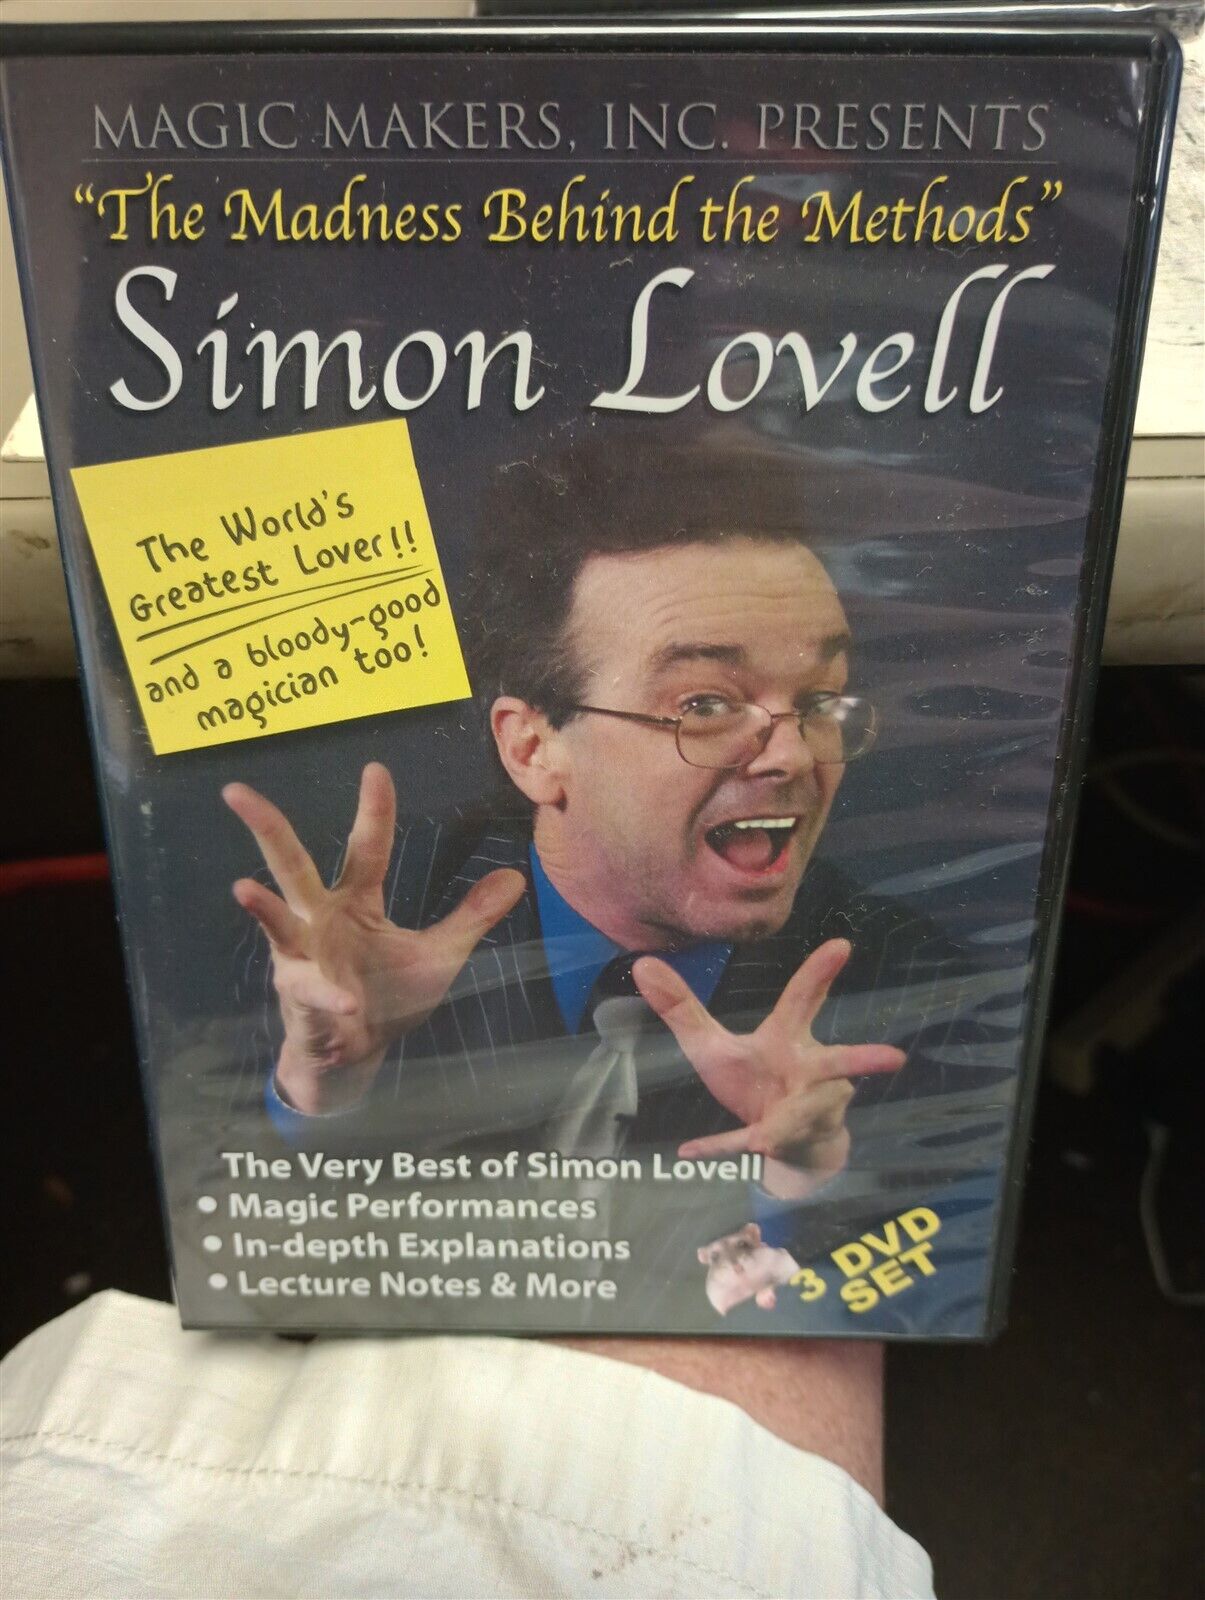 Simon Lovell: The Methods Behind the Madness (3 DVD Set)